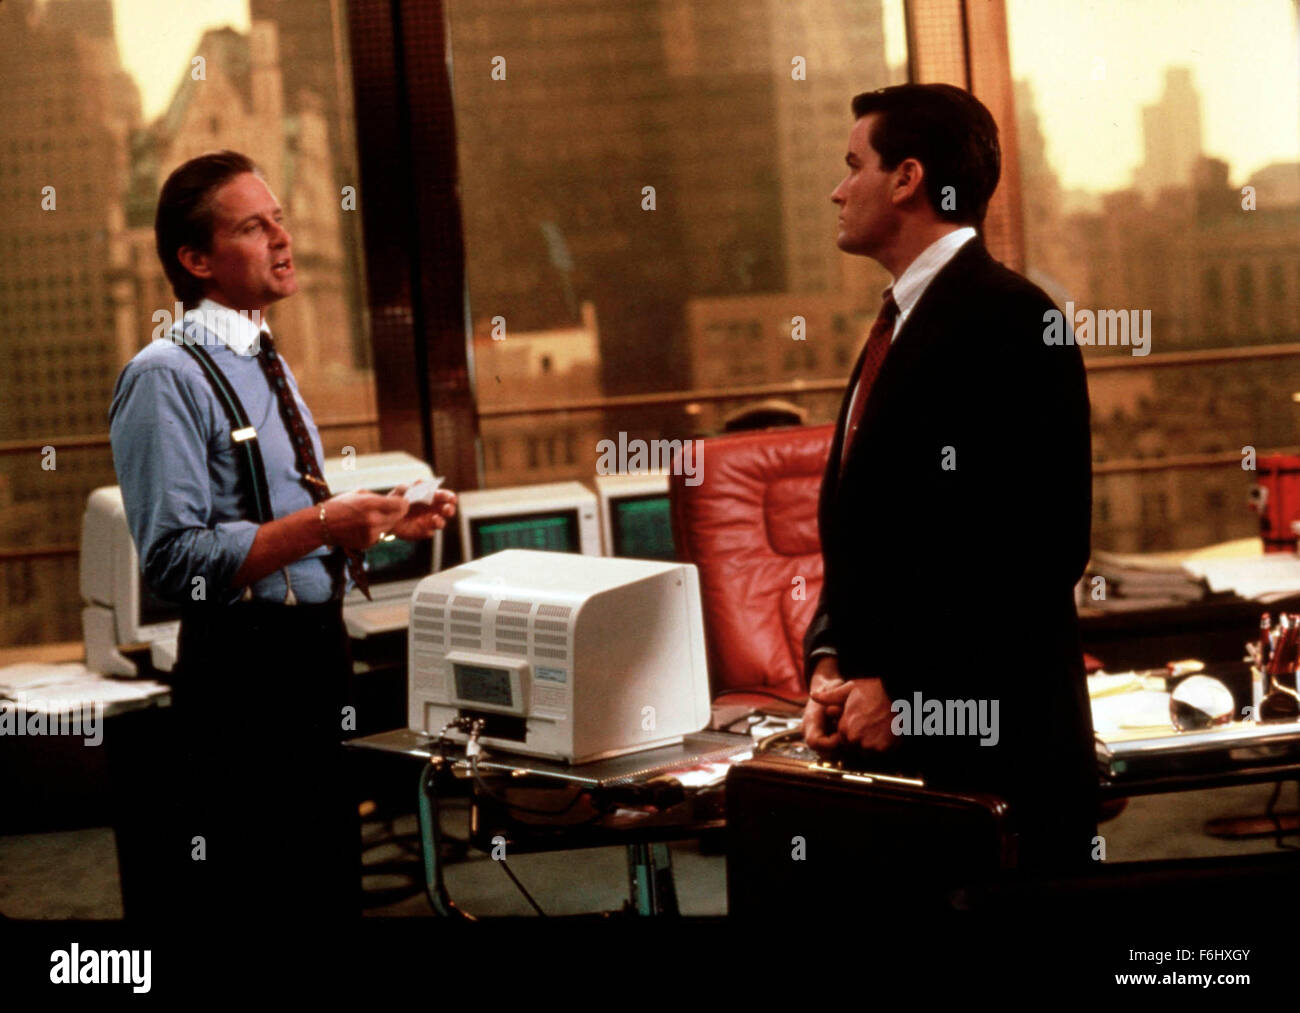 Aug 15, 2002; New York, NY, USA; MICHAEL DOUGLAS and CHARLIE SHEEN in 1987 movie 'Wall Street' directed by Oliver Stone. Stock Photo